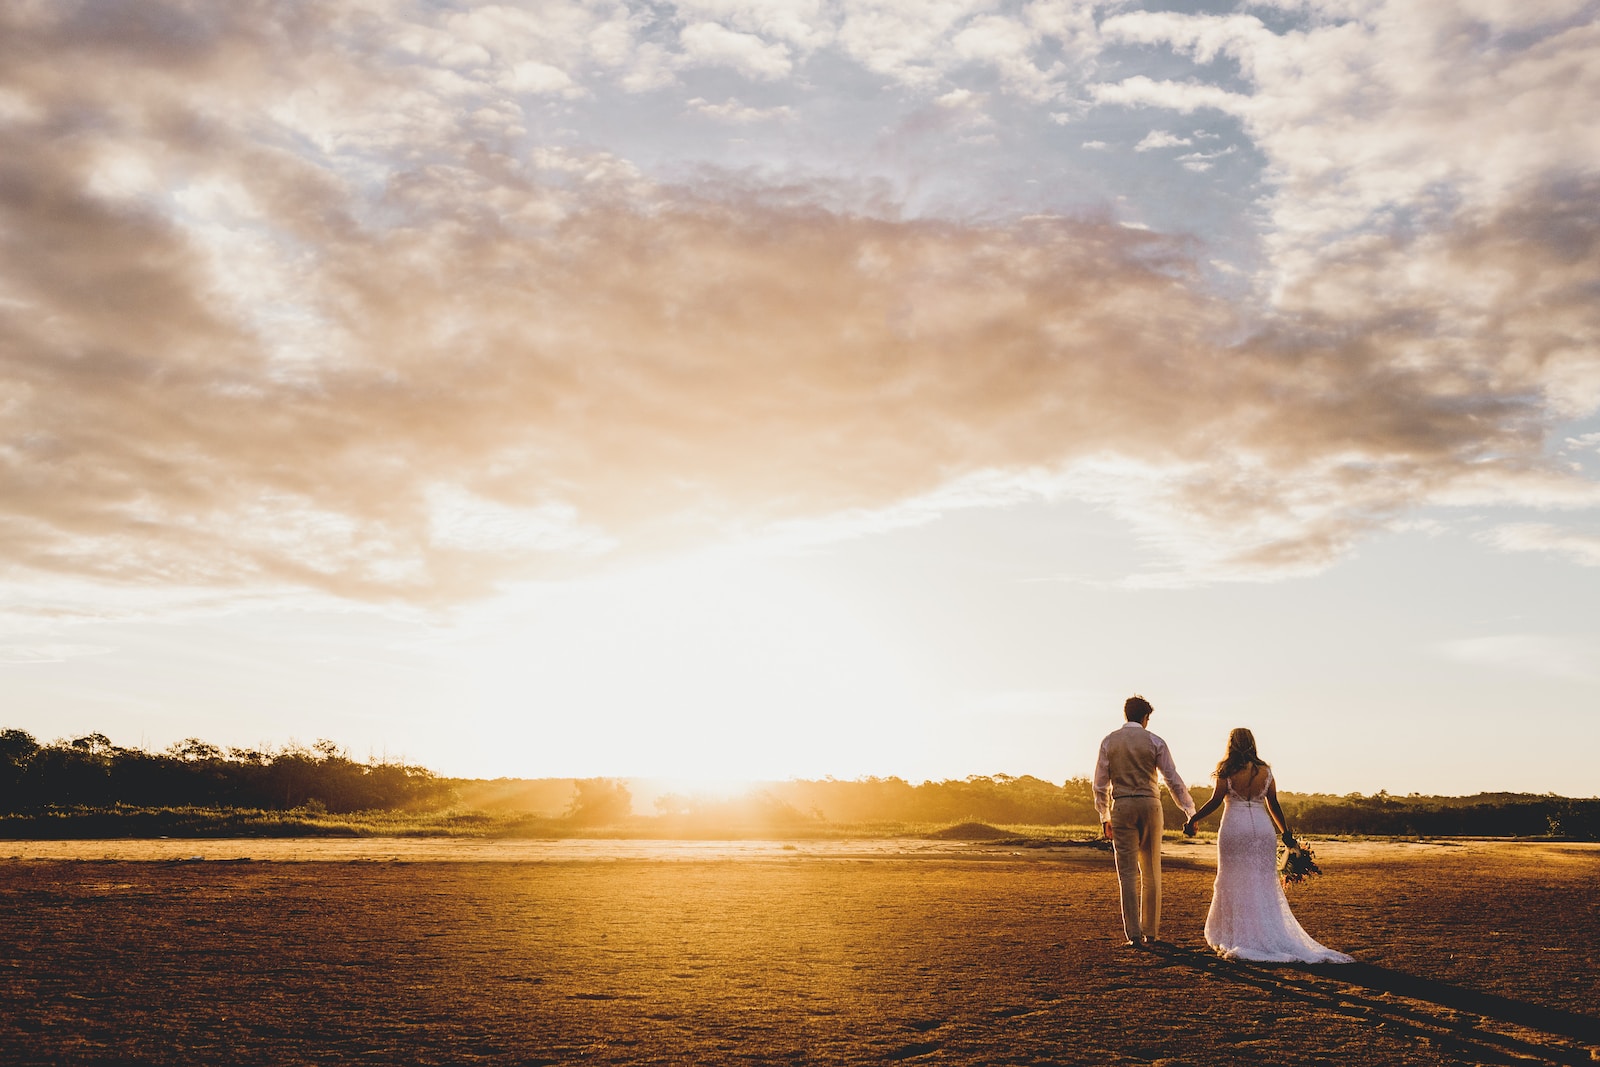 couple standing on road under sunset